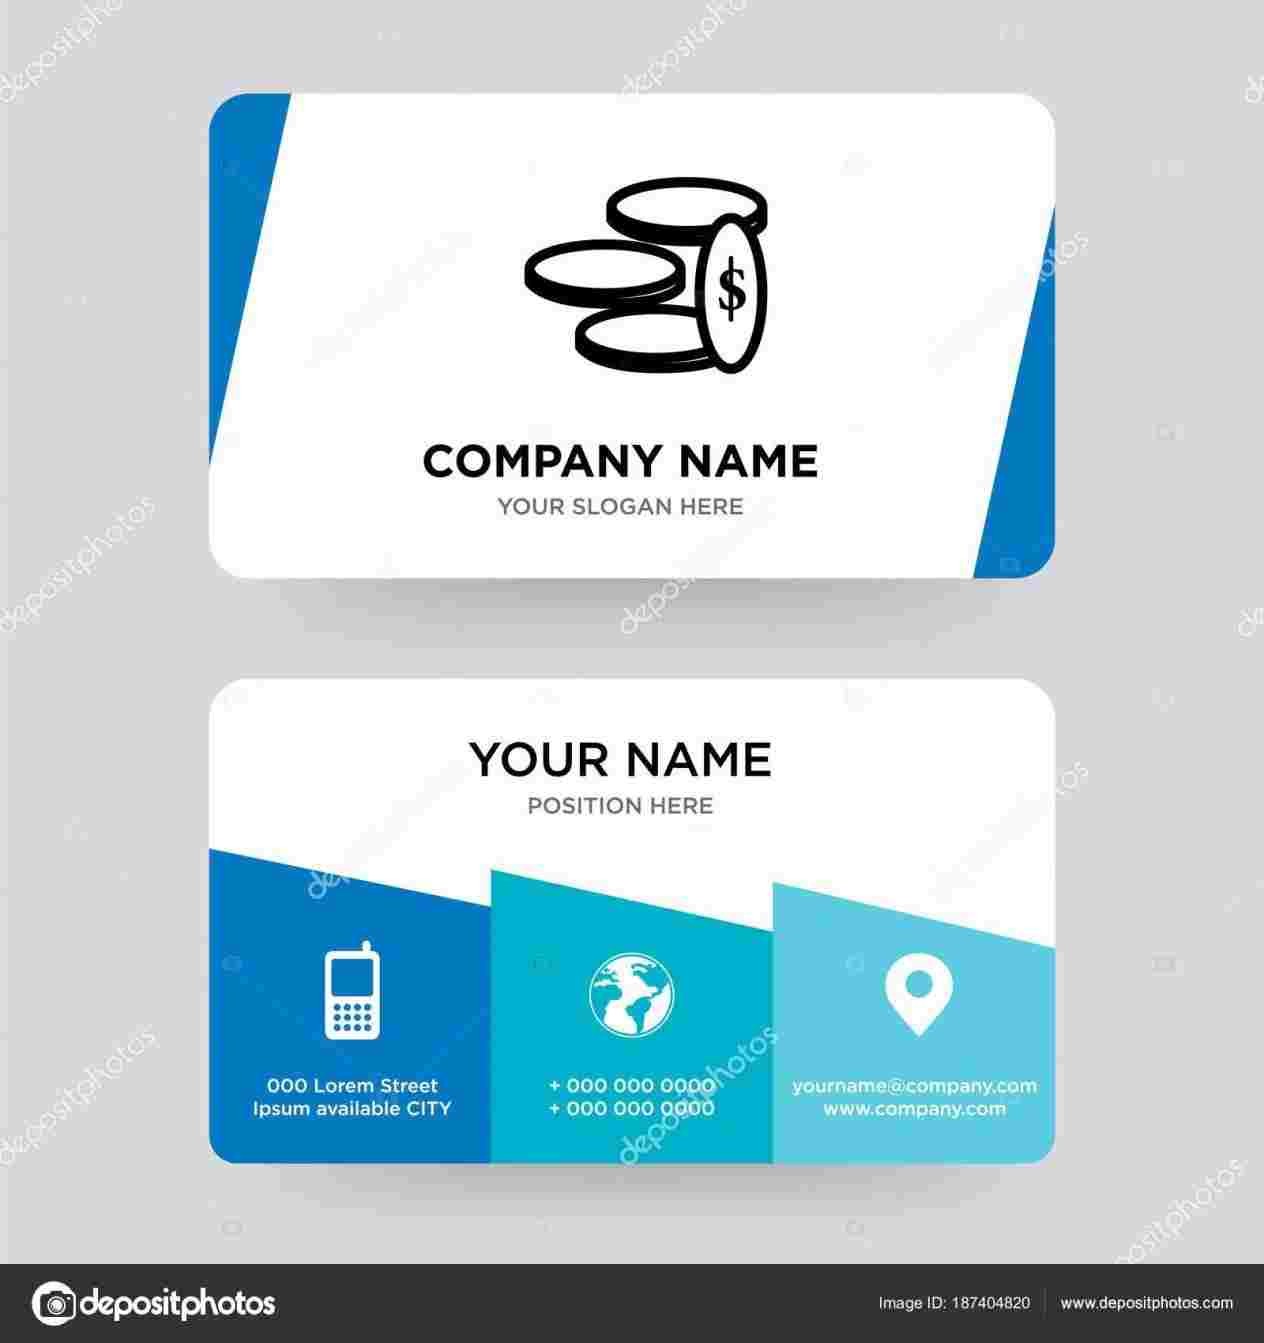 Card Template Marketing How To Use Cards Turn Credit